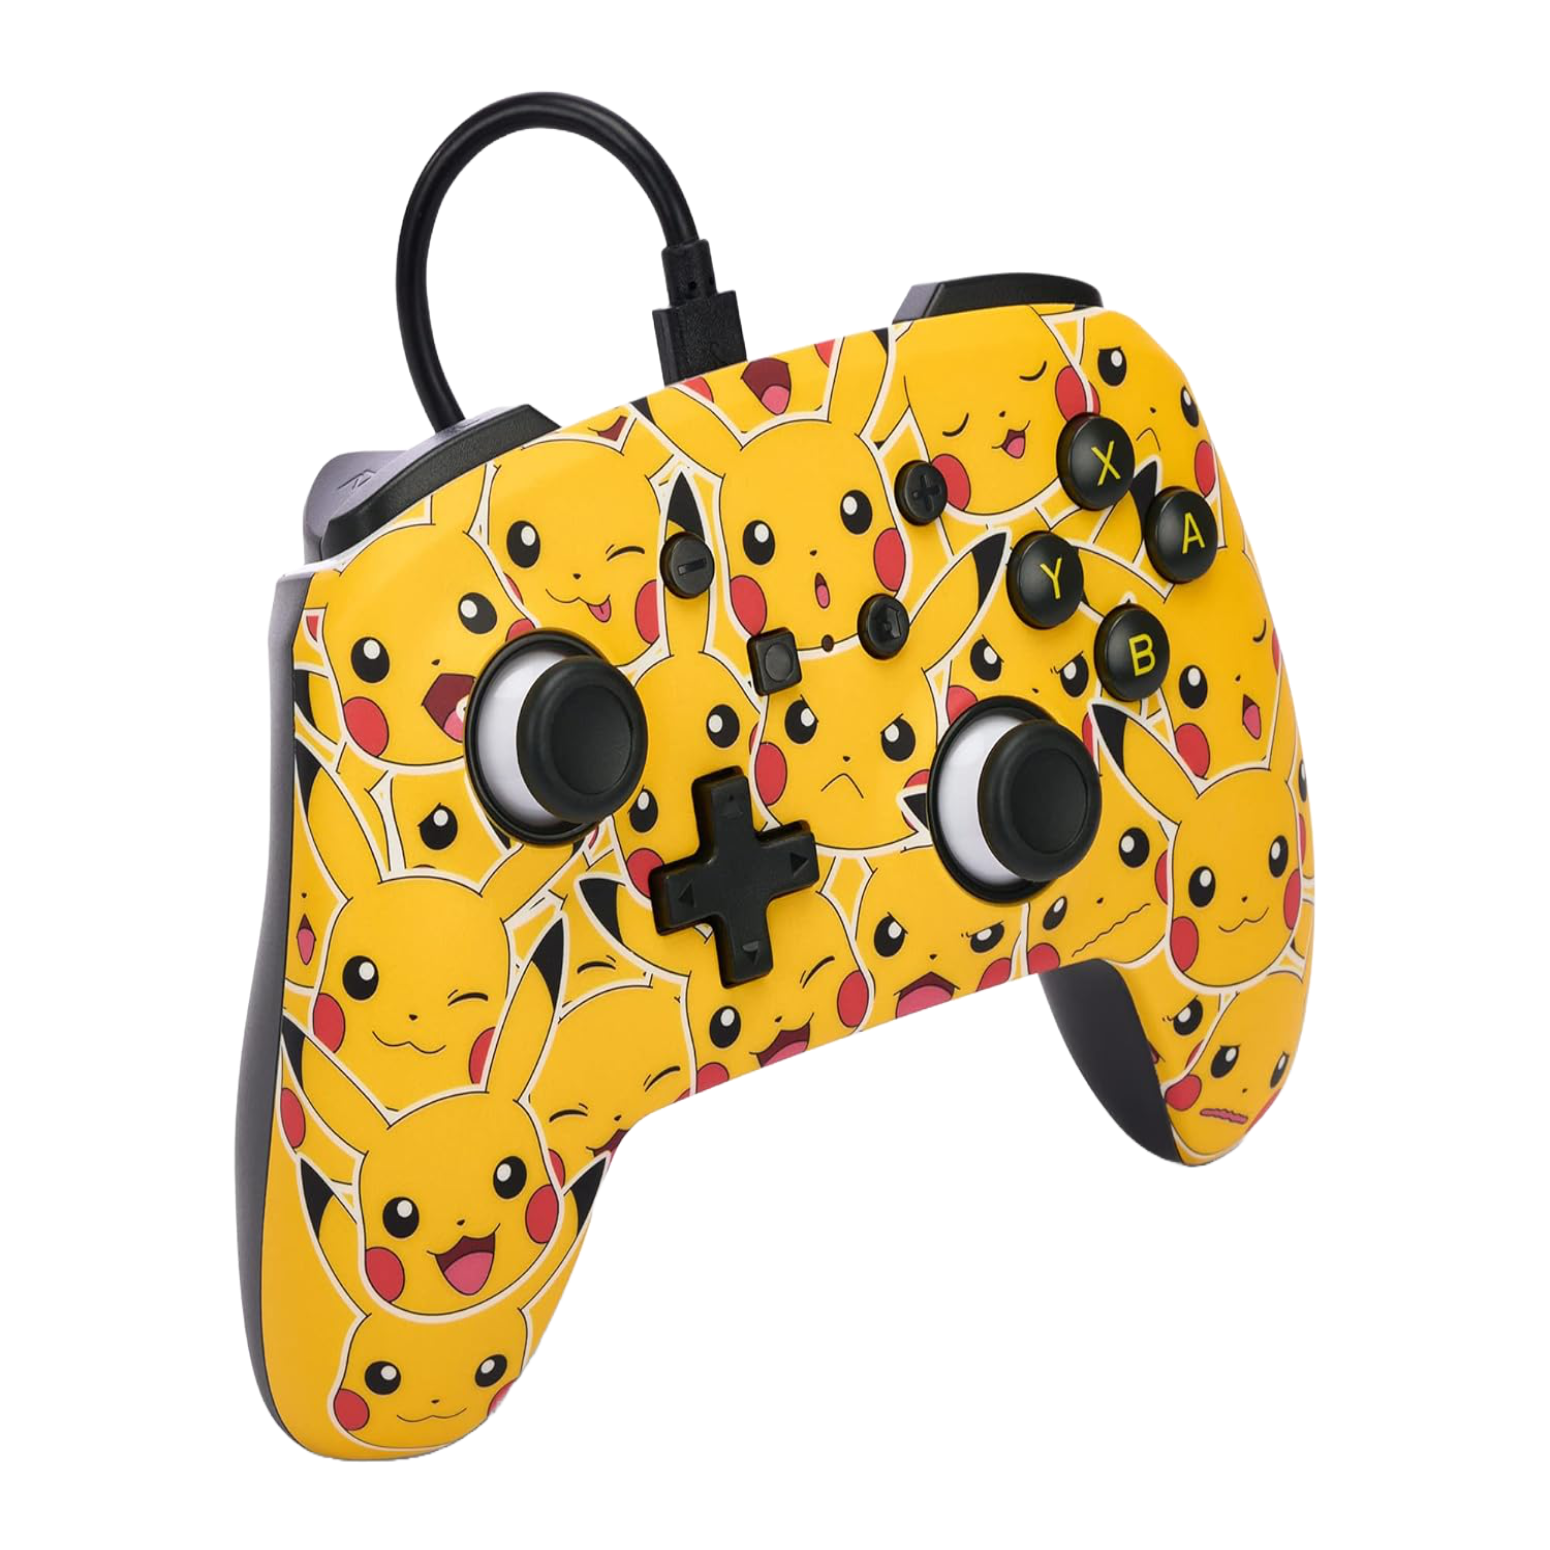 A PNG render of the PowerA Enhanced Wired Controller Pikachu Edition on a transparent background.